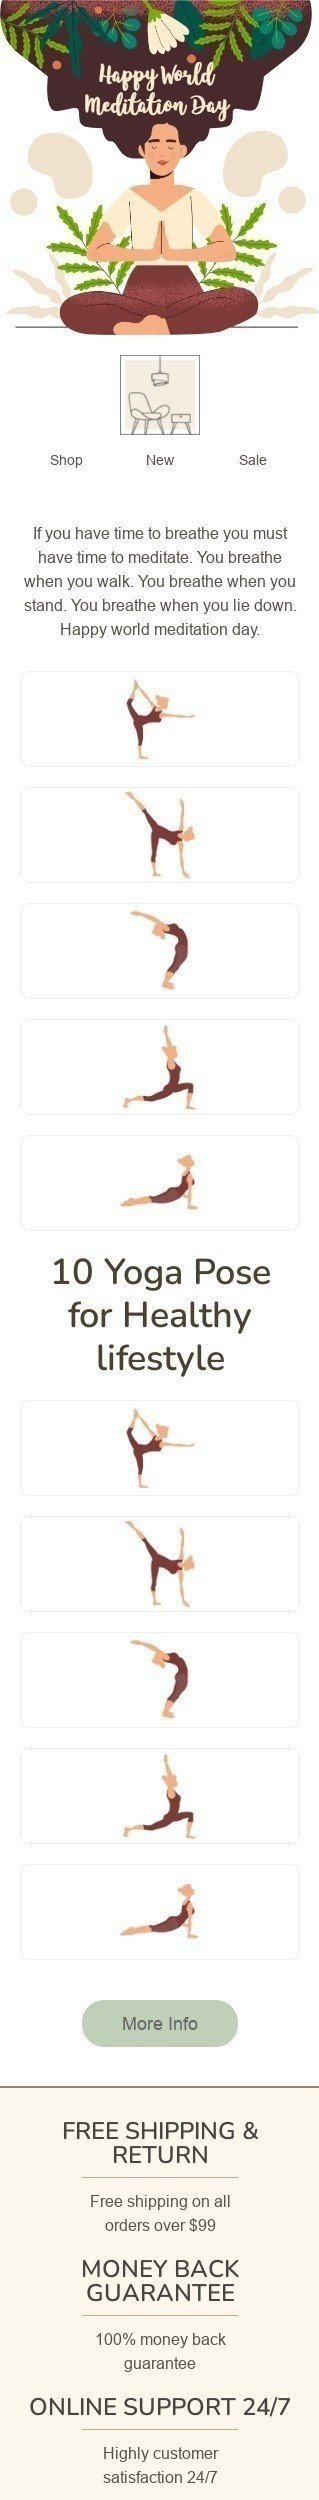 World meditation day Email Template "10 Yoga Pose" for Furniture, Interior & DIY industry mobile view